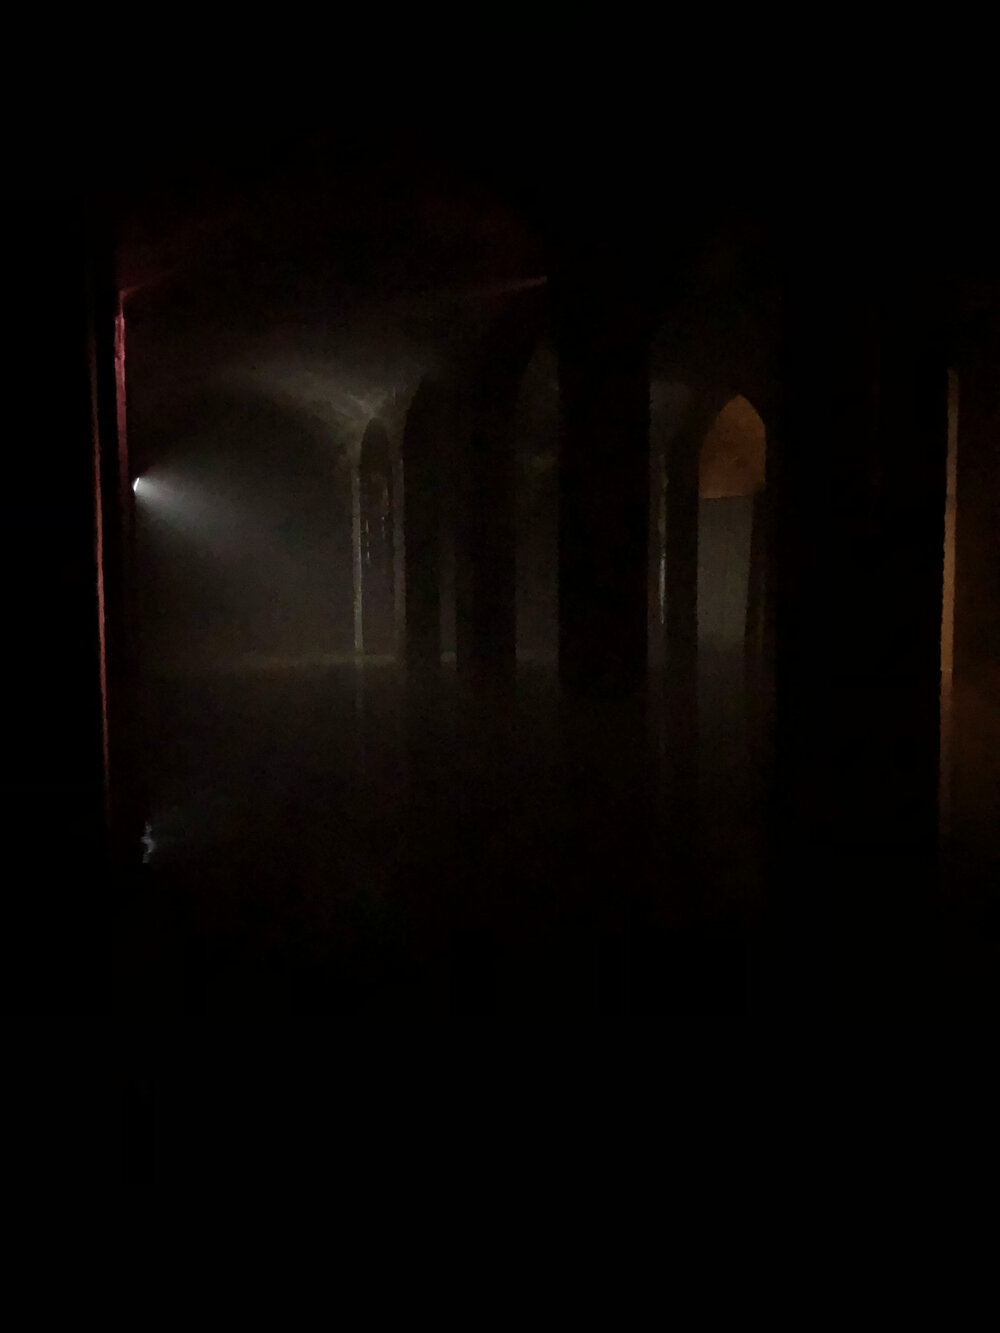  Walking through the dark halls of Cisternerne during SUPERFLEX’s exhibition,  It Is Not The End of The World  in 2019 